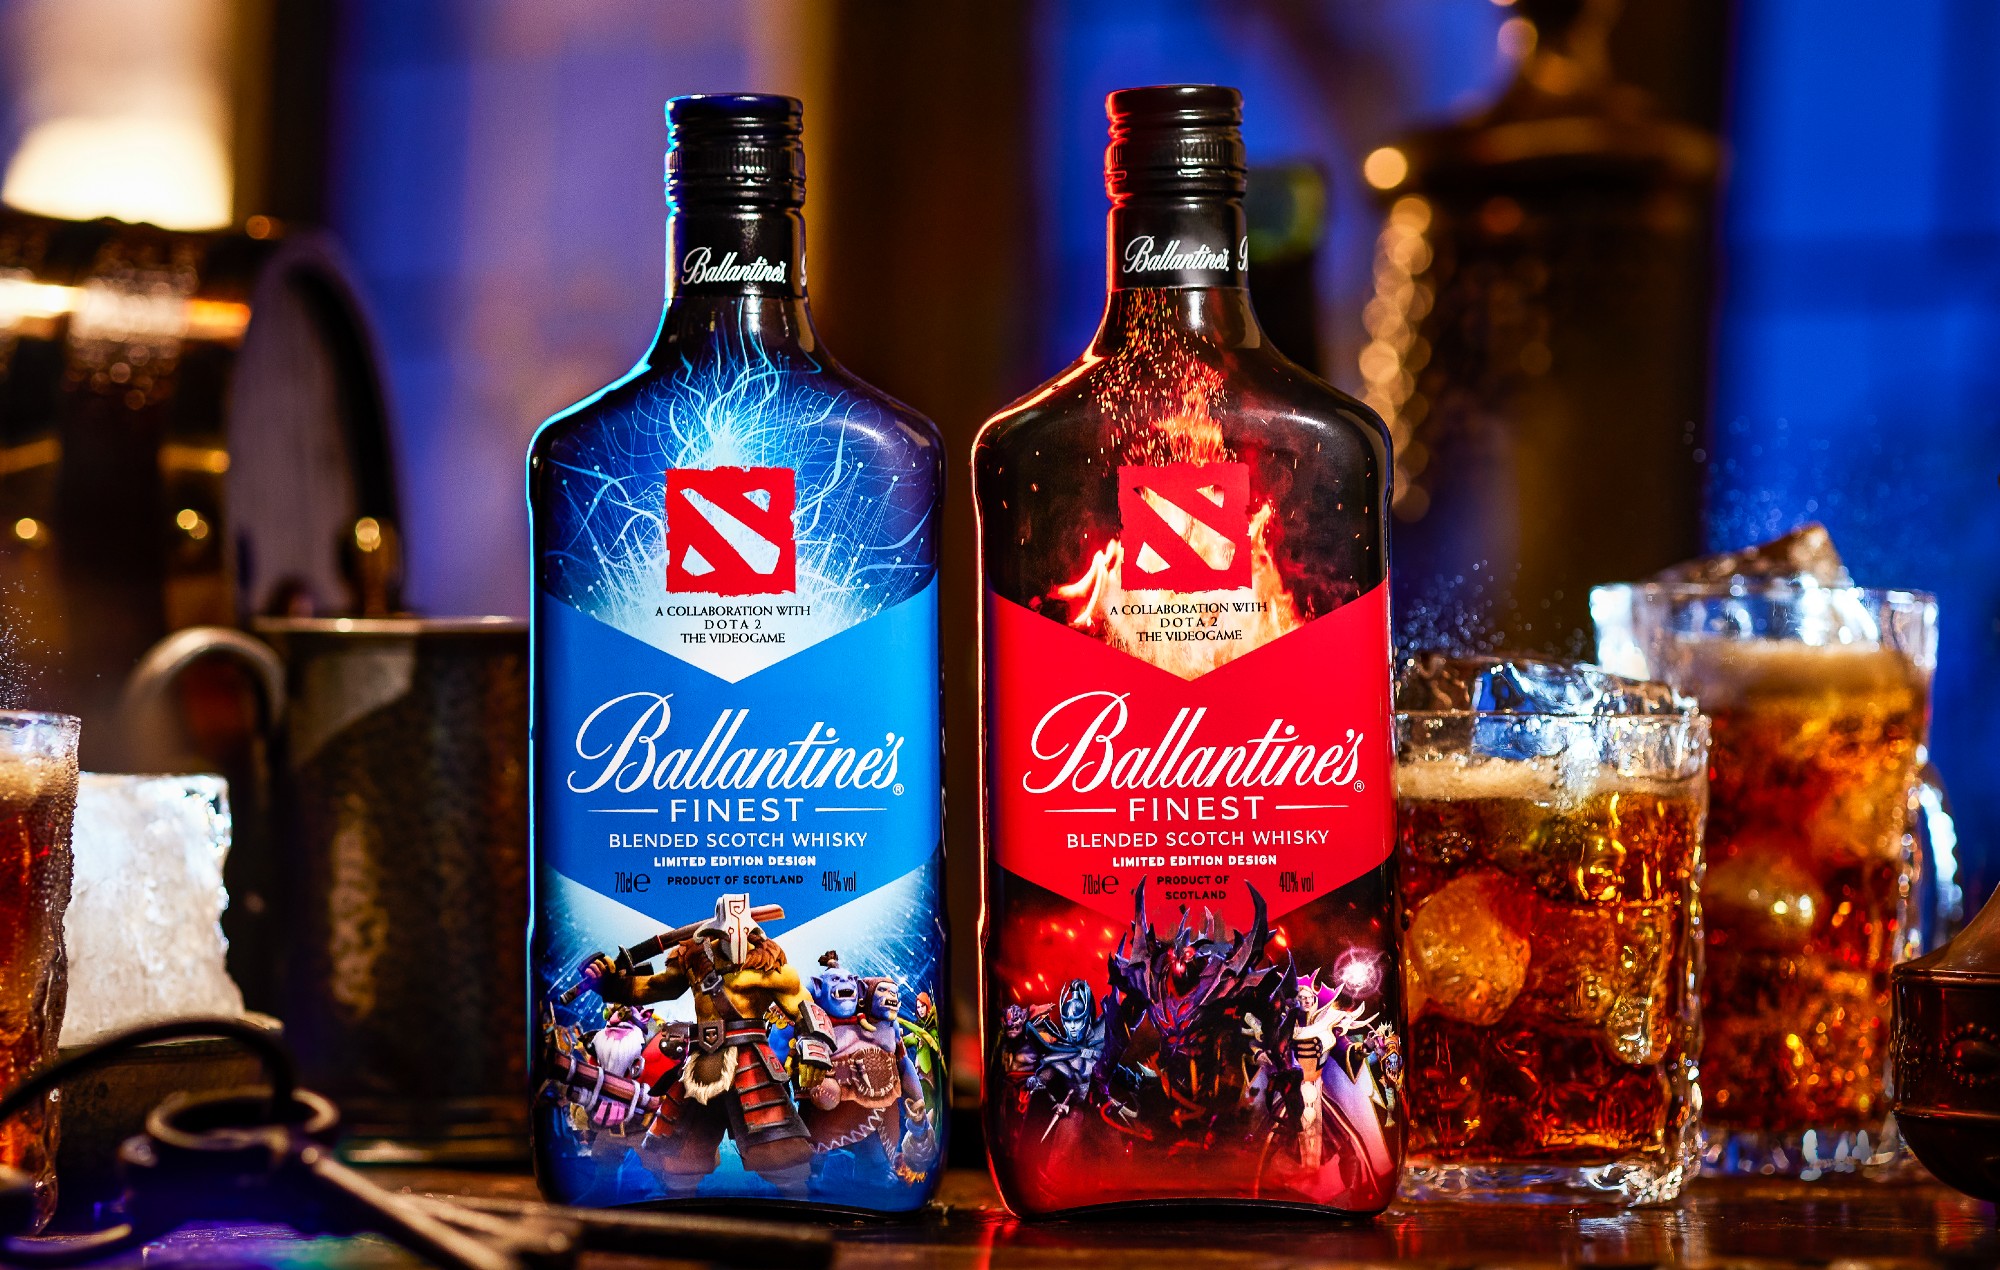 ‘Dota 2’ celebrates 10th anniversary with limited edition Ballantine’s whiskey